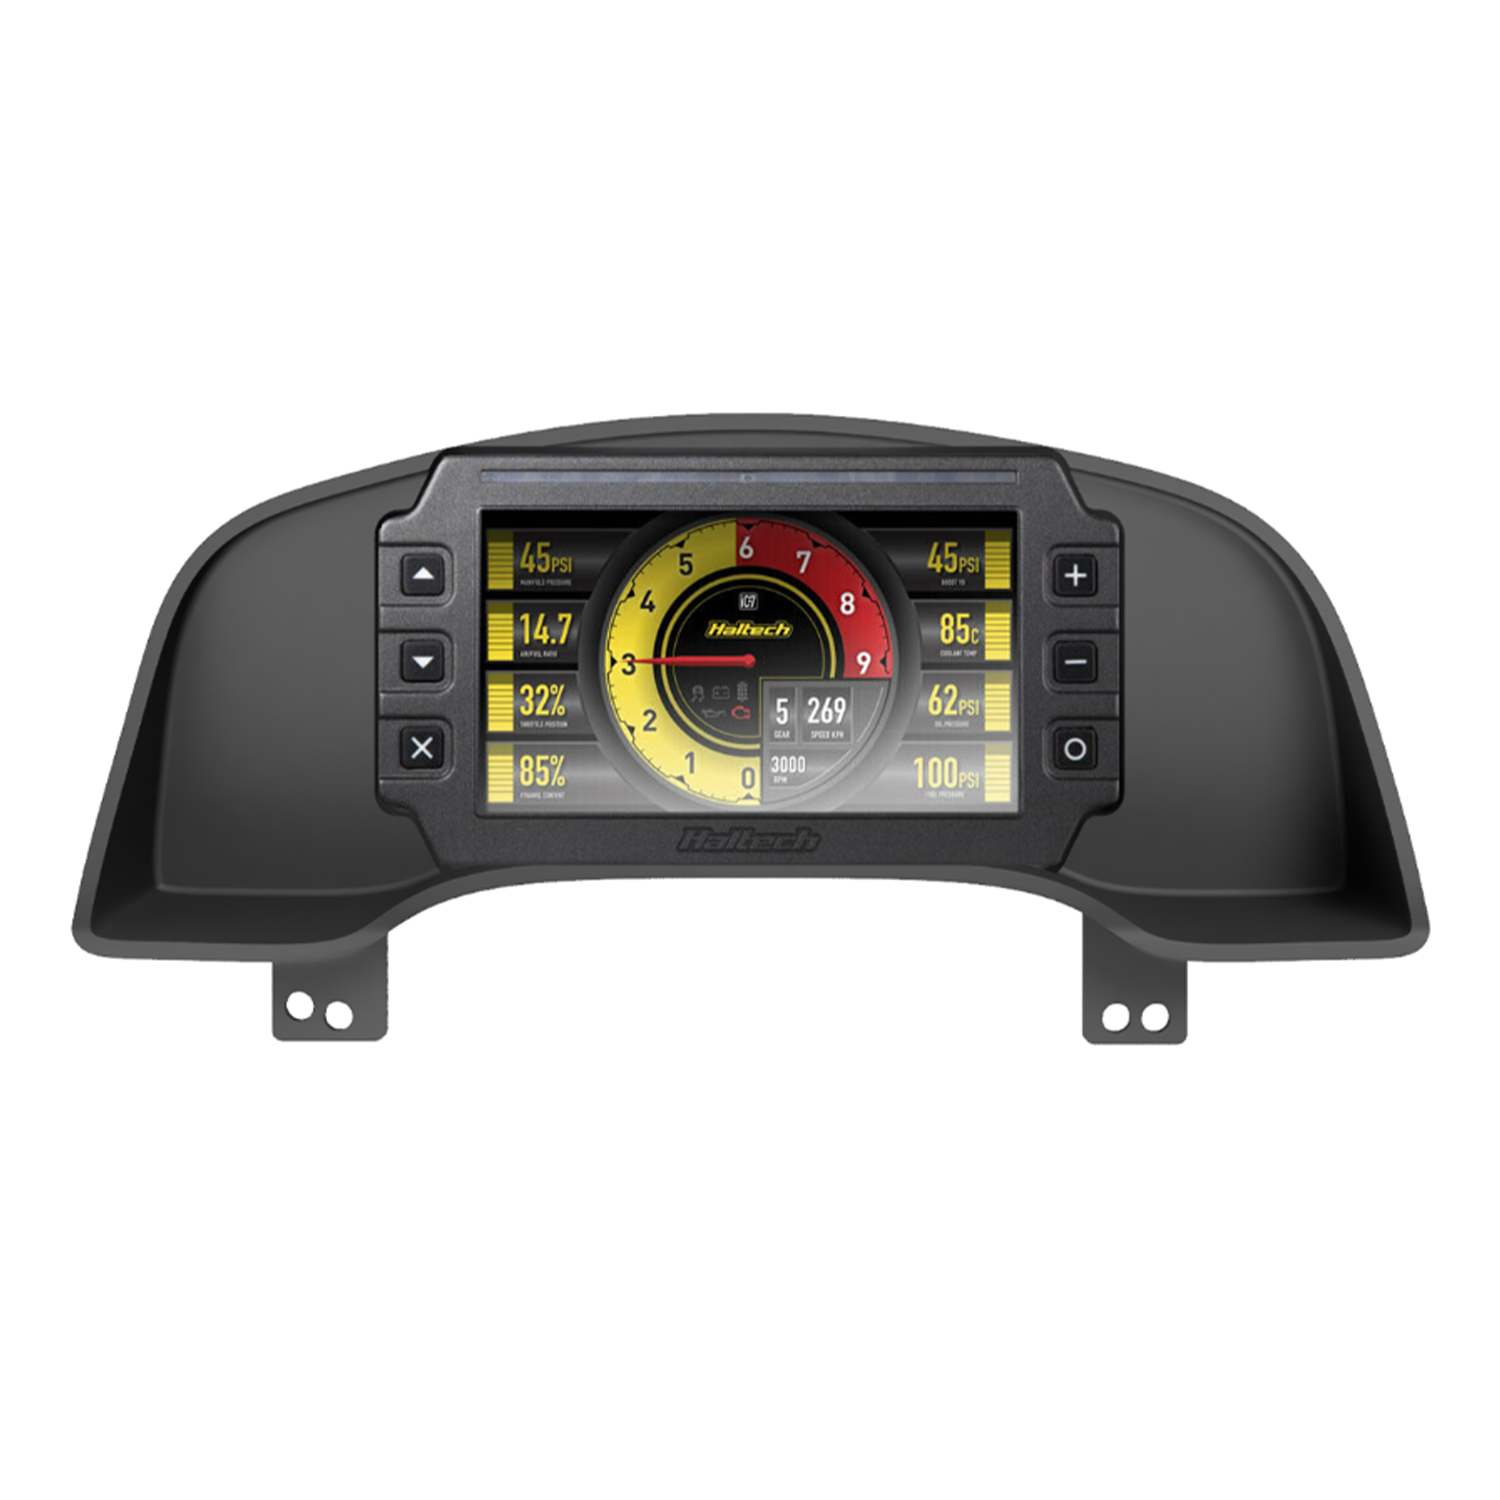 Toyota JZX110 Recessed Dash Mount for the Haltech iC-7 (display not included)